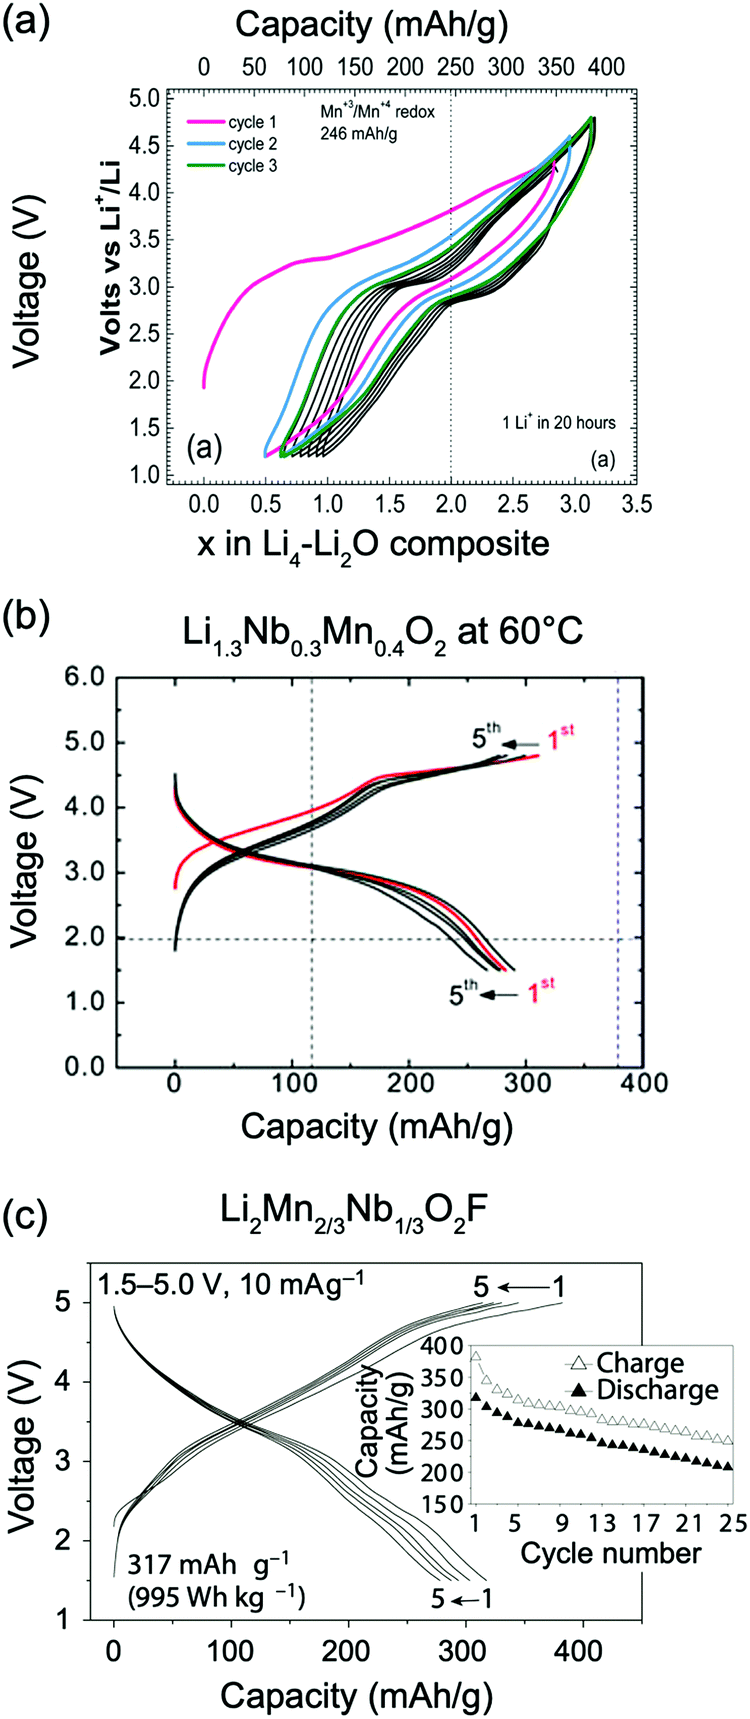 Cation Disordered Rocksalt Transition Metal Oxides And Oxyfluorides For High Energy Lithium Ion Cathodes Energy Environmental Science Rsc Publishing Doi 10 1039 C9ee02803j